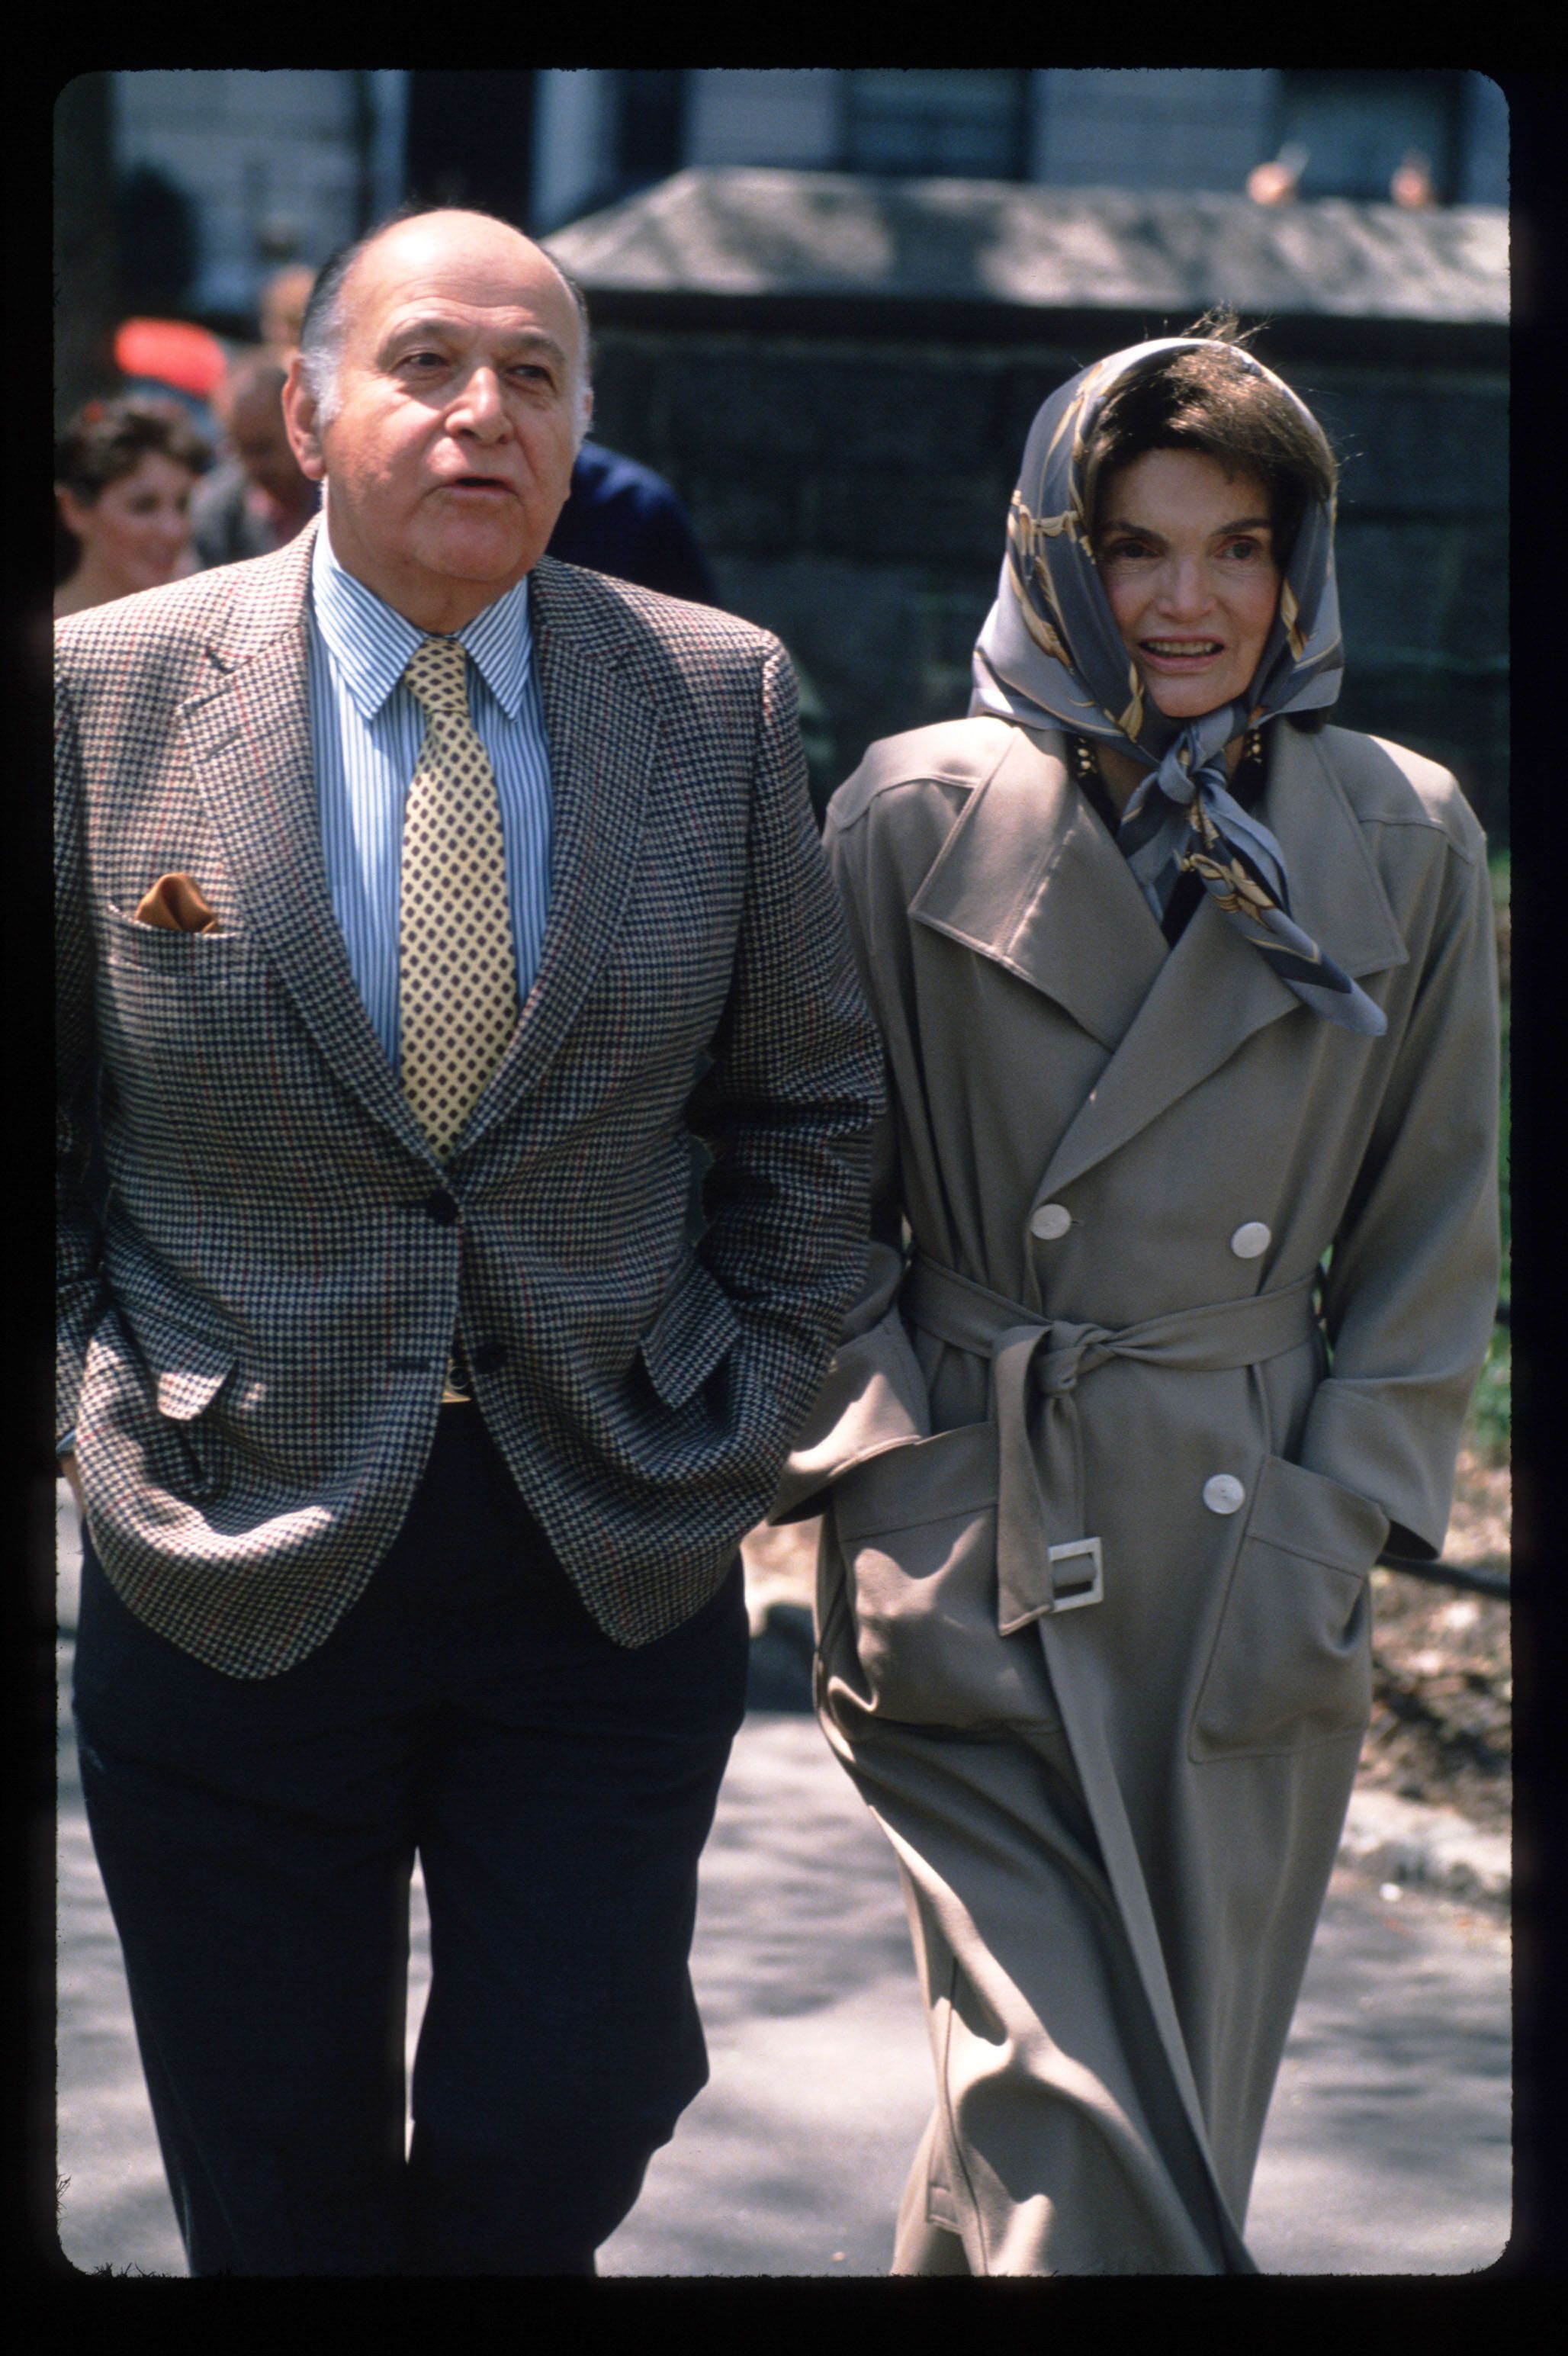 Jacqueline Kennedy Onassis takes her first walk with Maurice Tempelsman in Central Park after leaving the hospital on April 24, 1994, in New York City | Photo: Steve Allen/Liaison/Getty Images